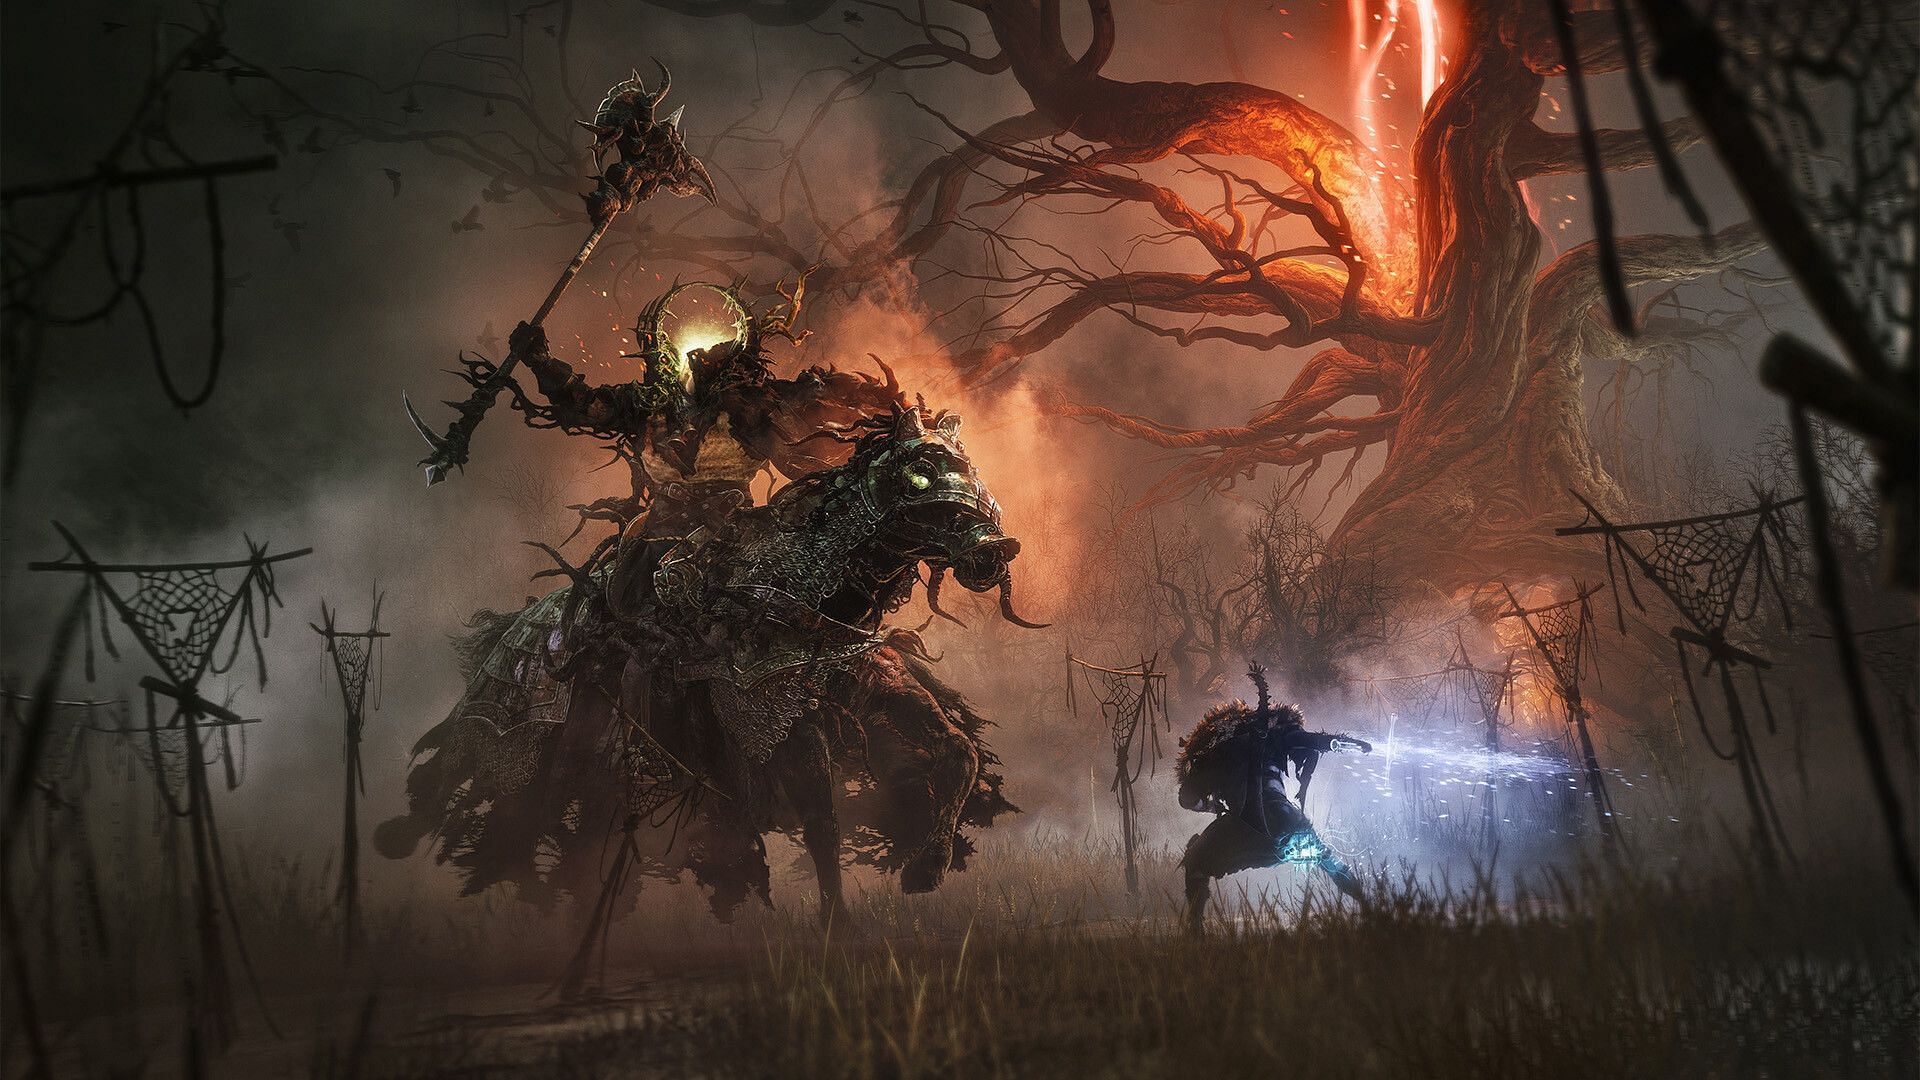 Lords of the Fallen Gameplay, Walkthrough, Guide, Wiki - News